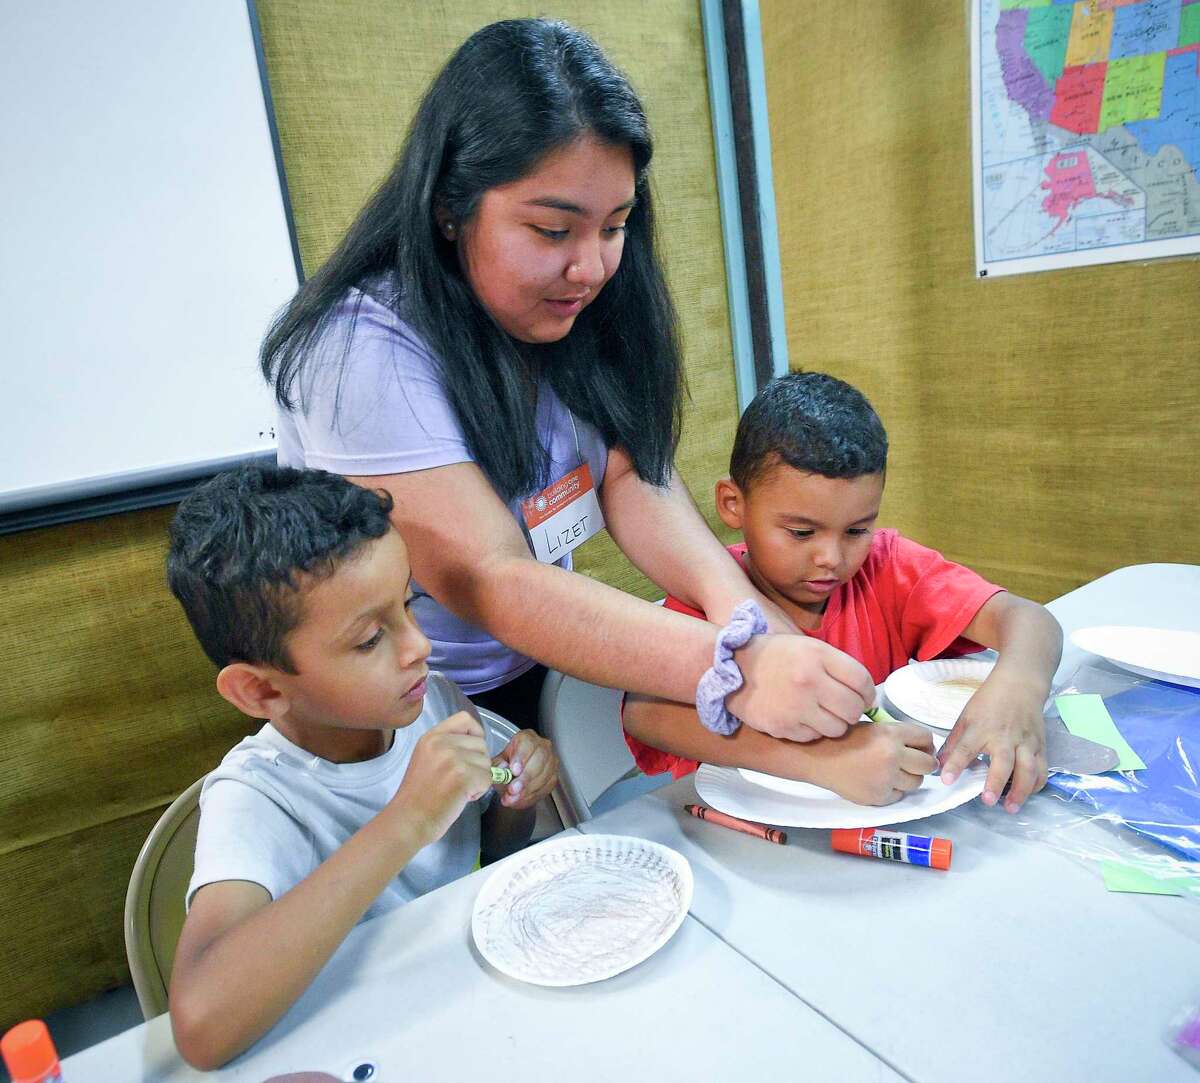 Volunteer Lizet Garcia, a Stamford High School Senior, works with Michael Martinez and his cousin Brian Martinez on an art project during a Summer Reading Program at Building One Community on July 23, 2019 in Stamford, Connecticut. Children and their parents took part in a month long reading program, designed to help prevent the Summer slide of reading and reading comprehension. The program in its 6th year, encourages parents to work with their child and pairs students in grades K-5 with volunteers with various activities to promote good literacy skills.